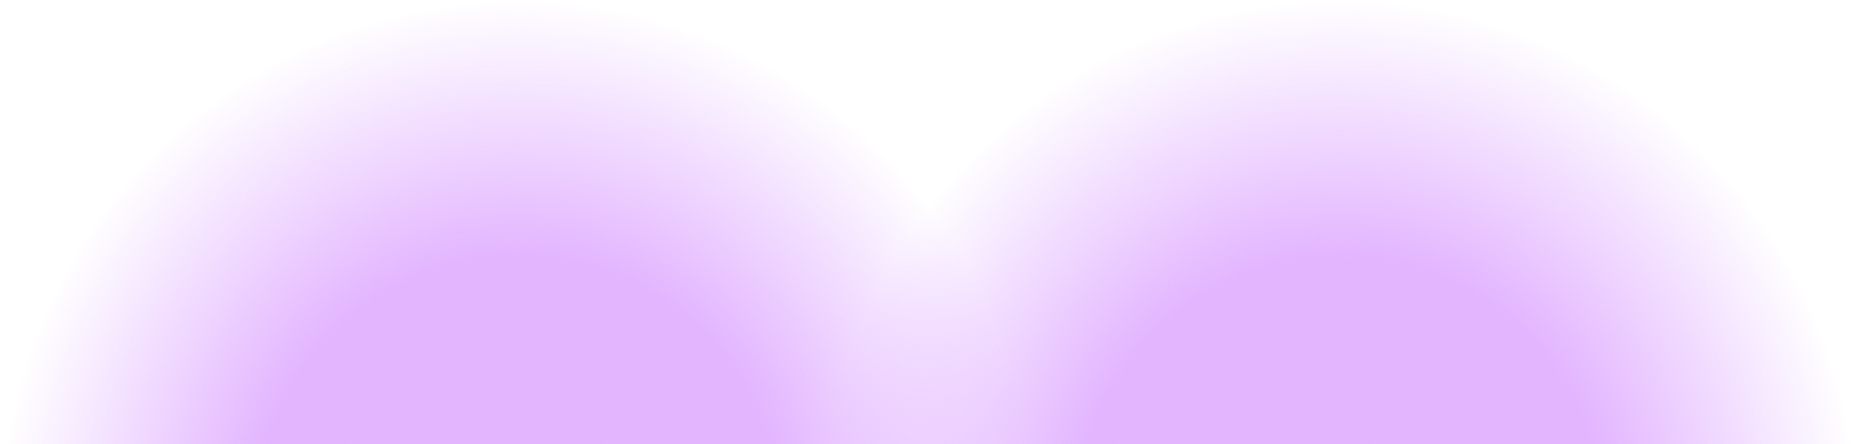 This is a pastel purple background with a white oval in the center representing the application layer.